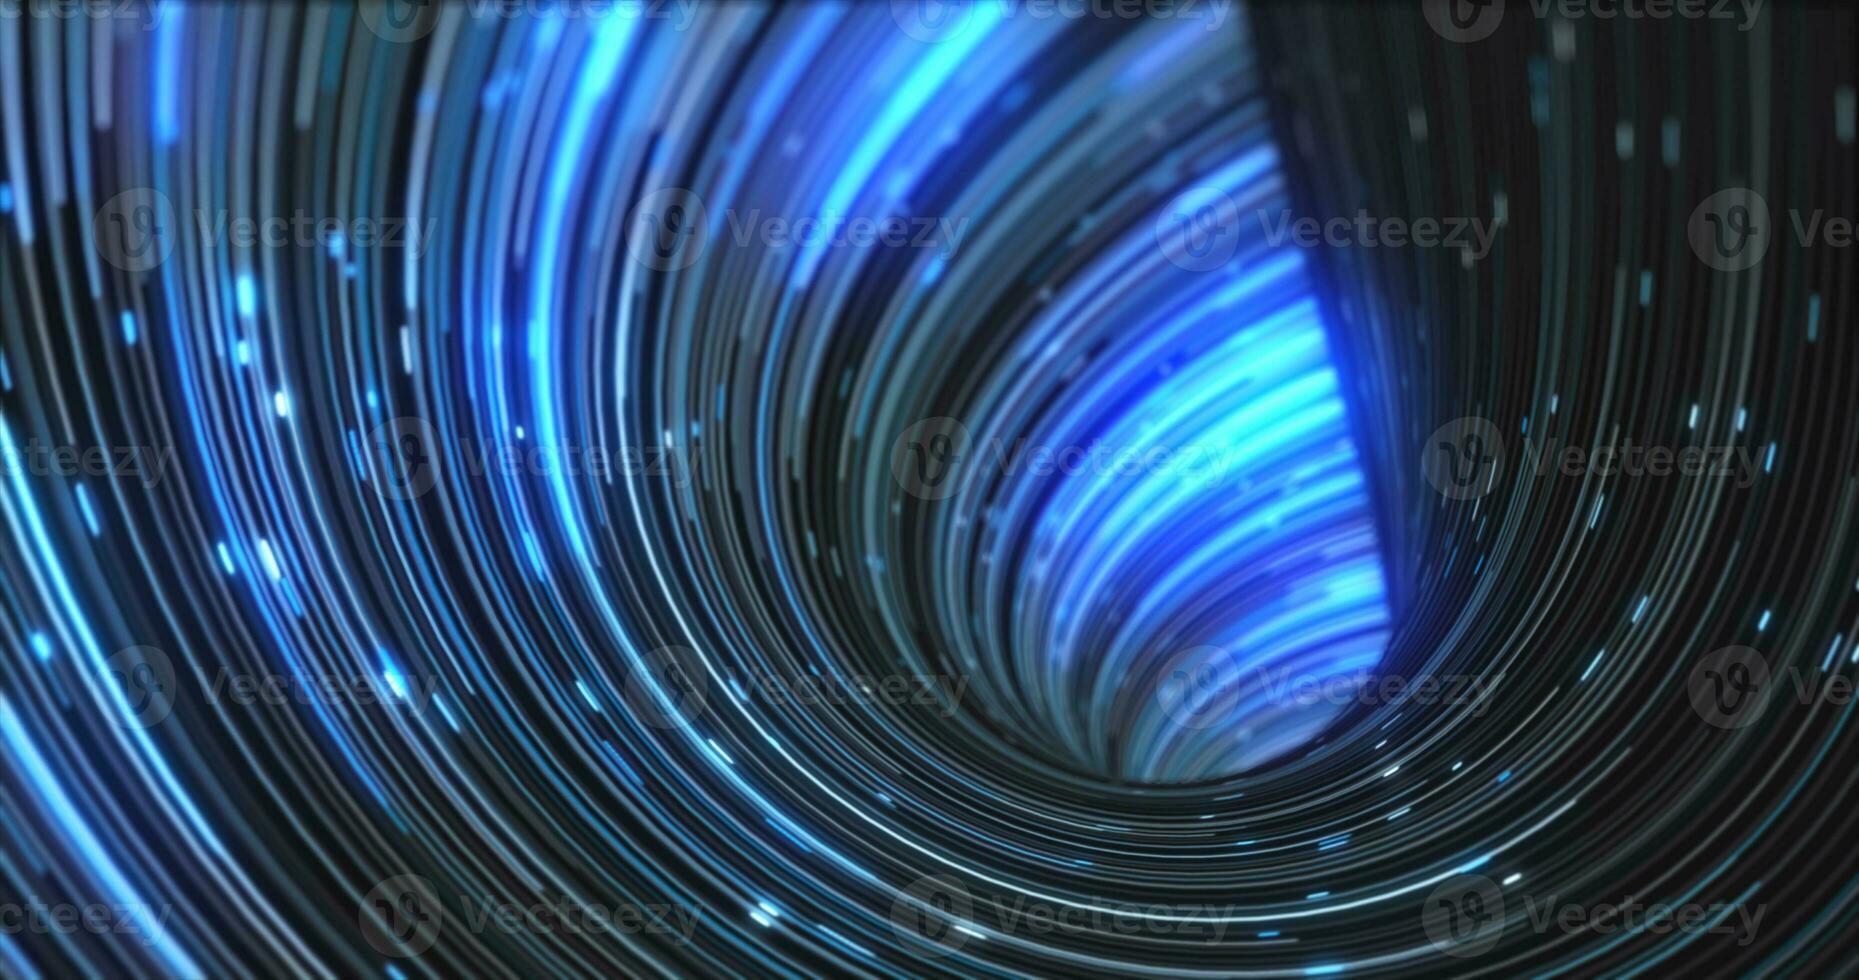 Abstract energy blue swirling curved lines of glowing magical streaks and energy particles background photo